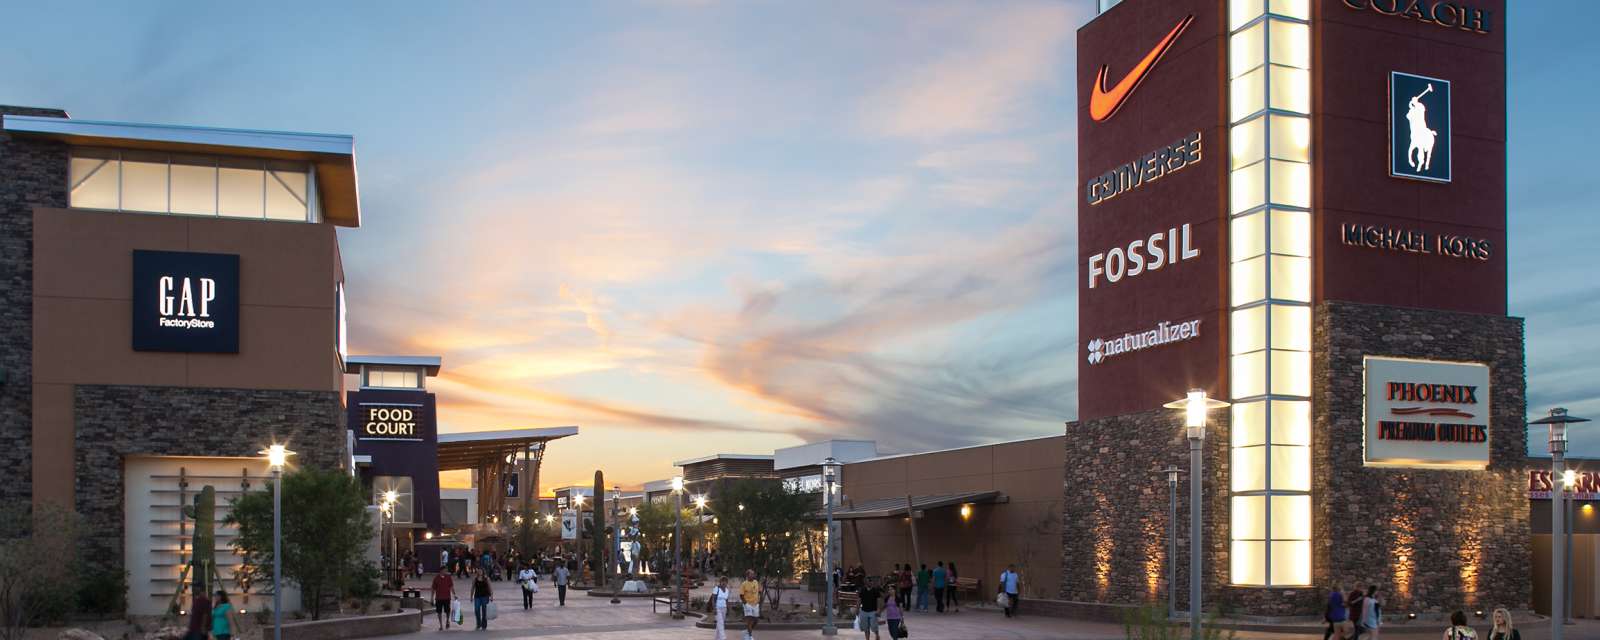 Phoenix Premium Outlets is one of the best places to shop in Phoenix